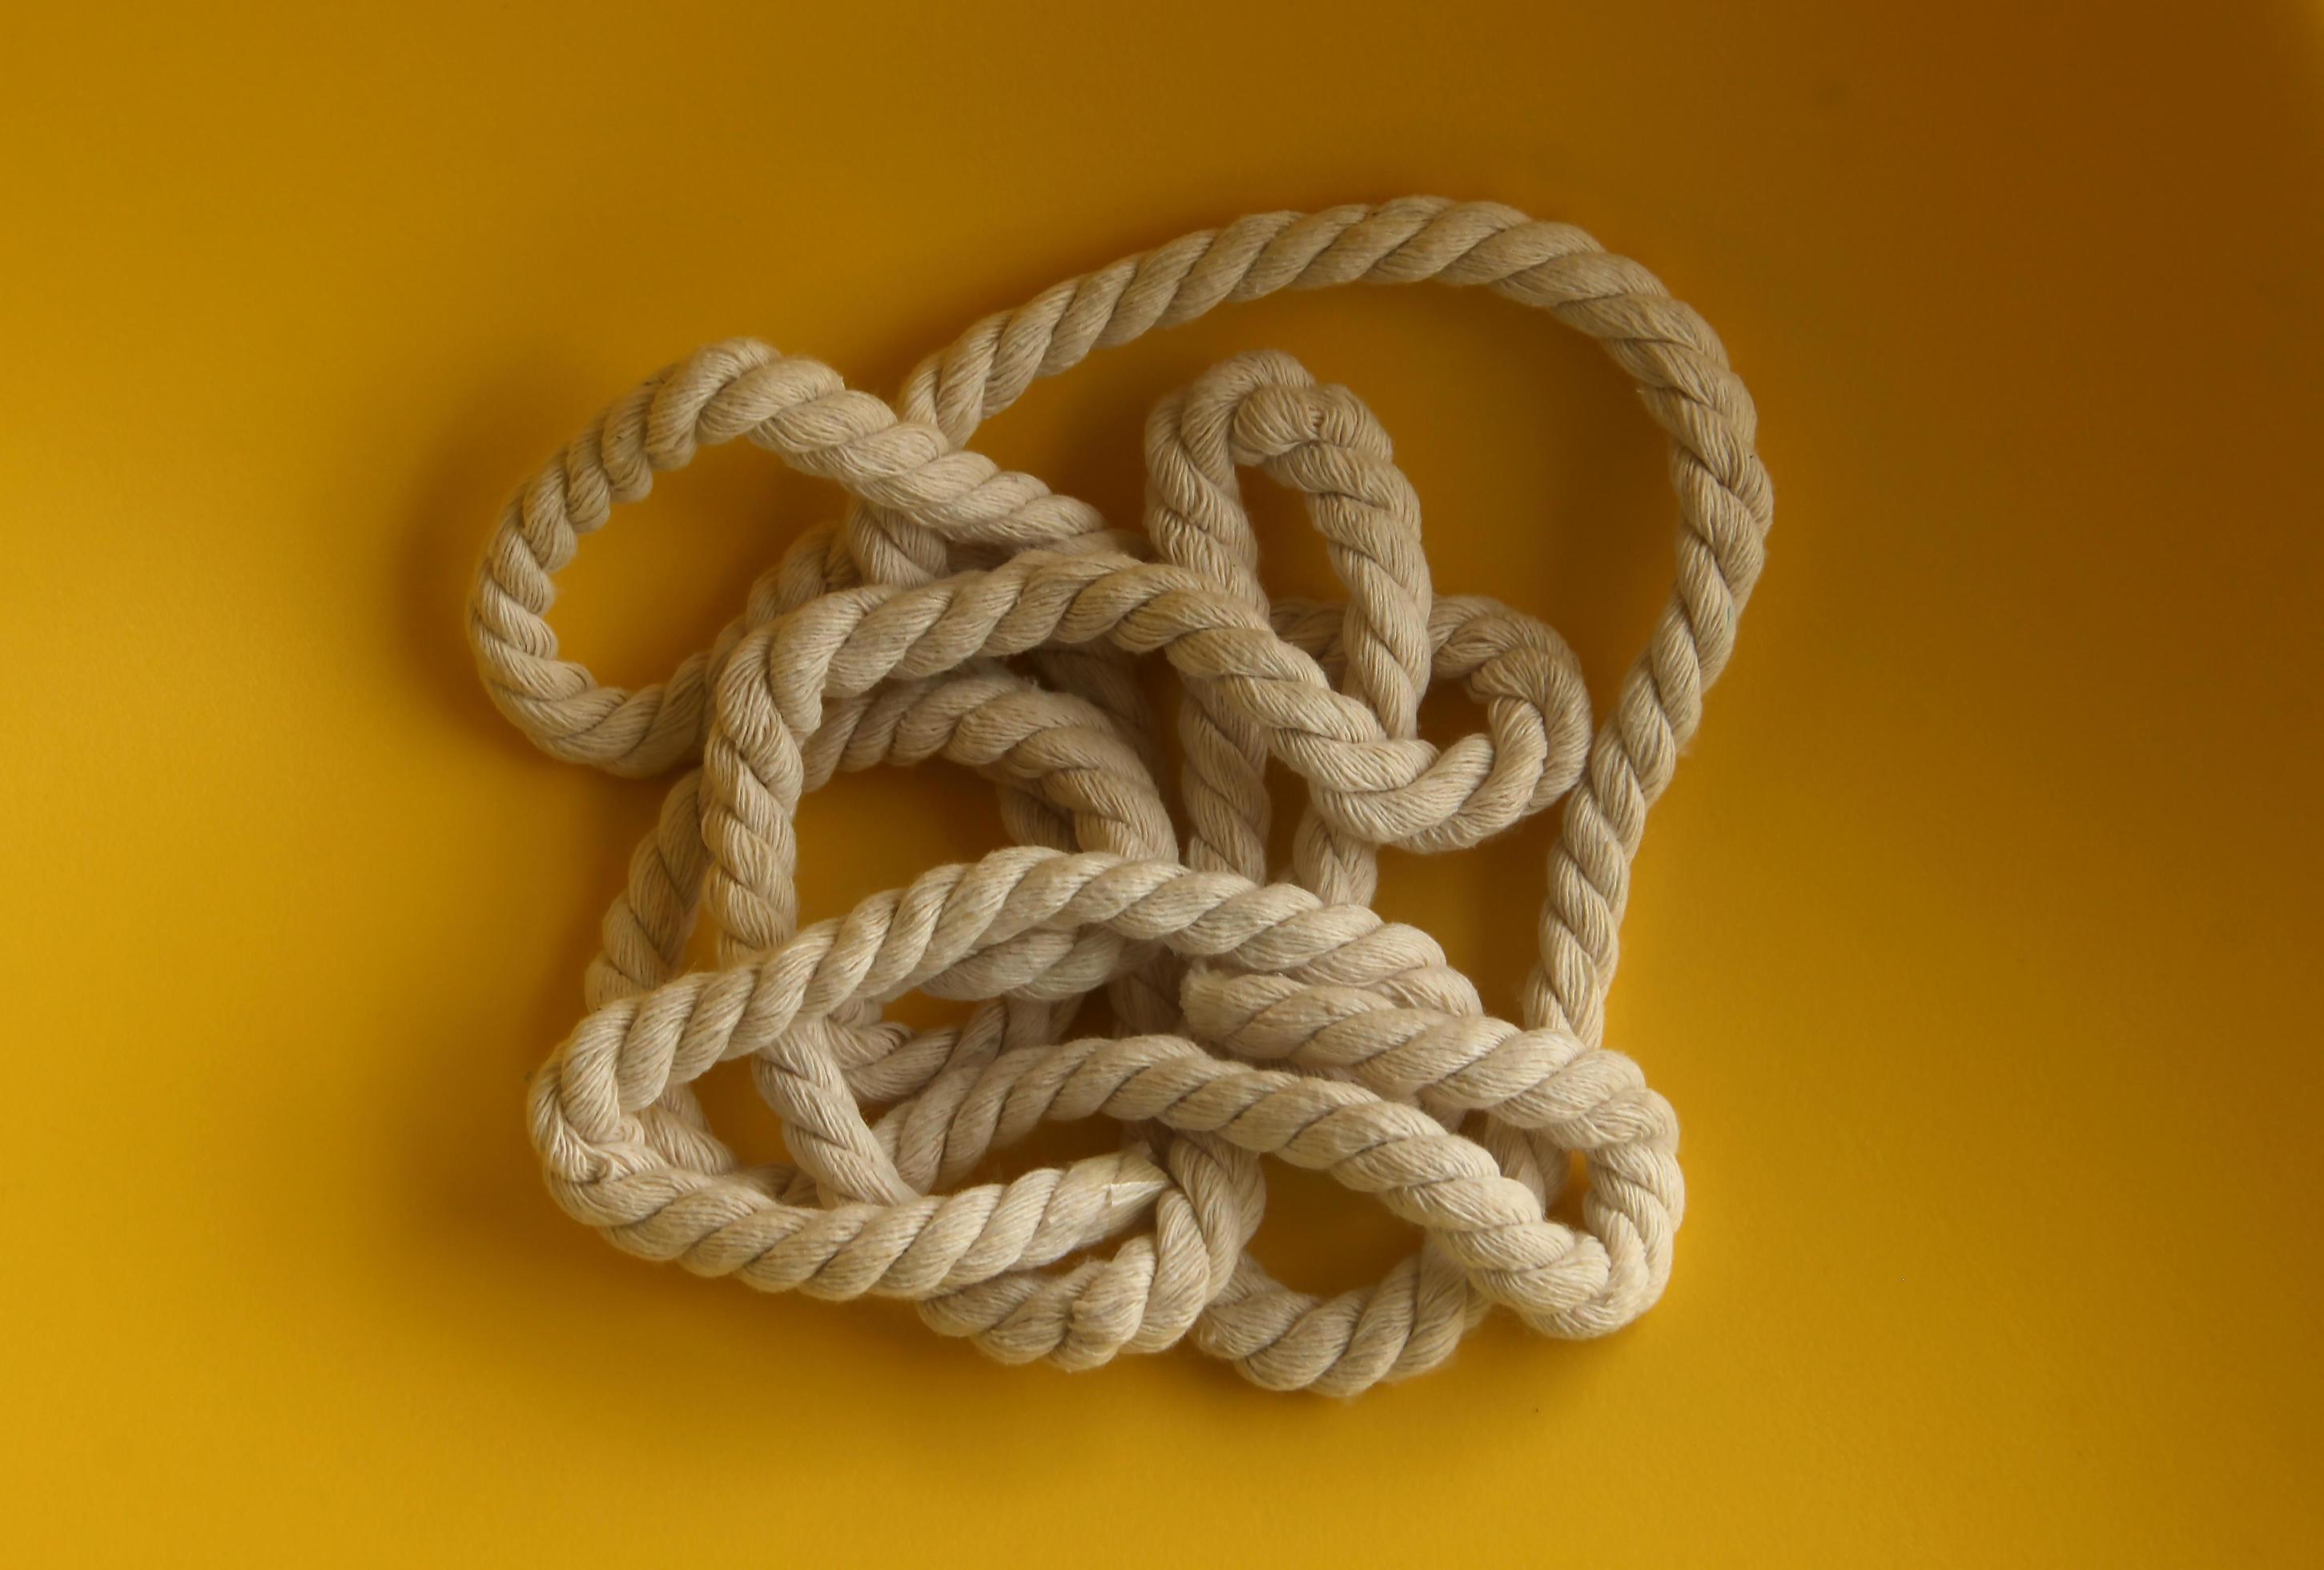 https://static.vecteezy.com/system/resources/previews/020/727/889/large_2x/strong-white-thick-braided-sailing-or-art-crafting-rope-isolated-on-plain-yellow-background-random-messy-placement-free-photo.jpg